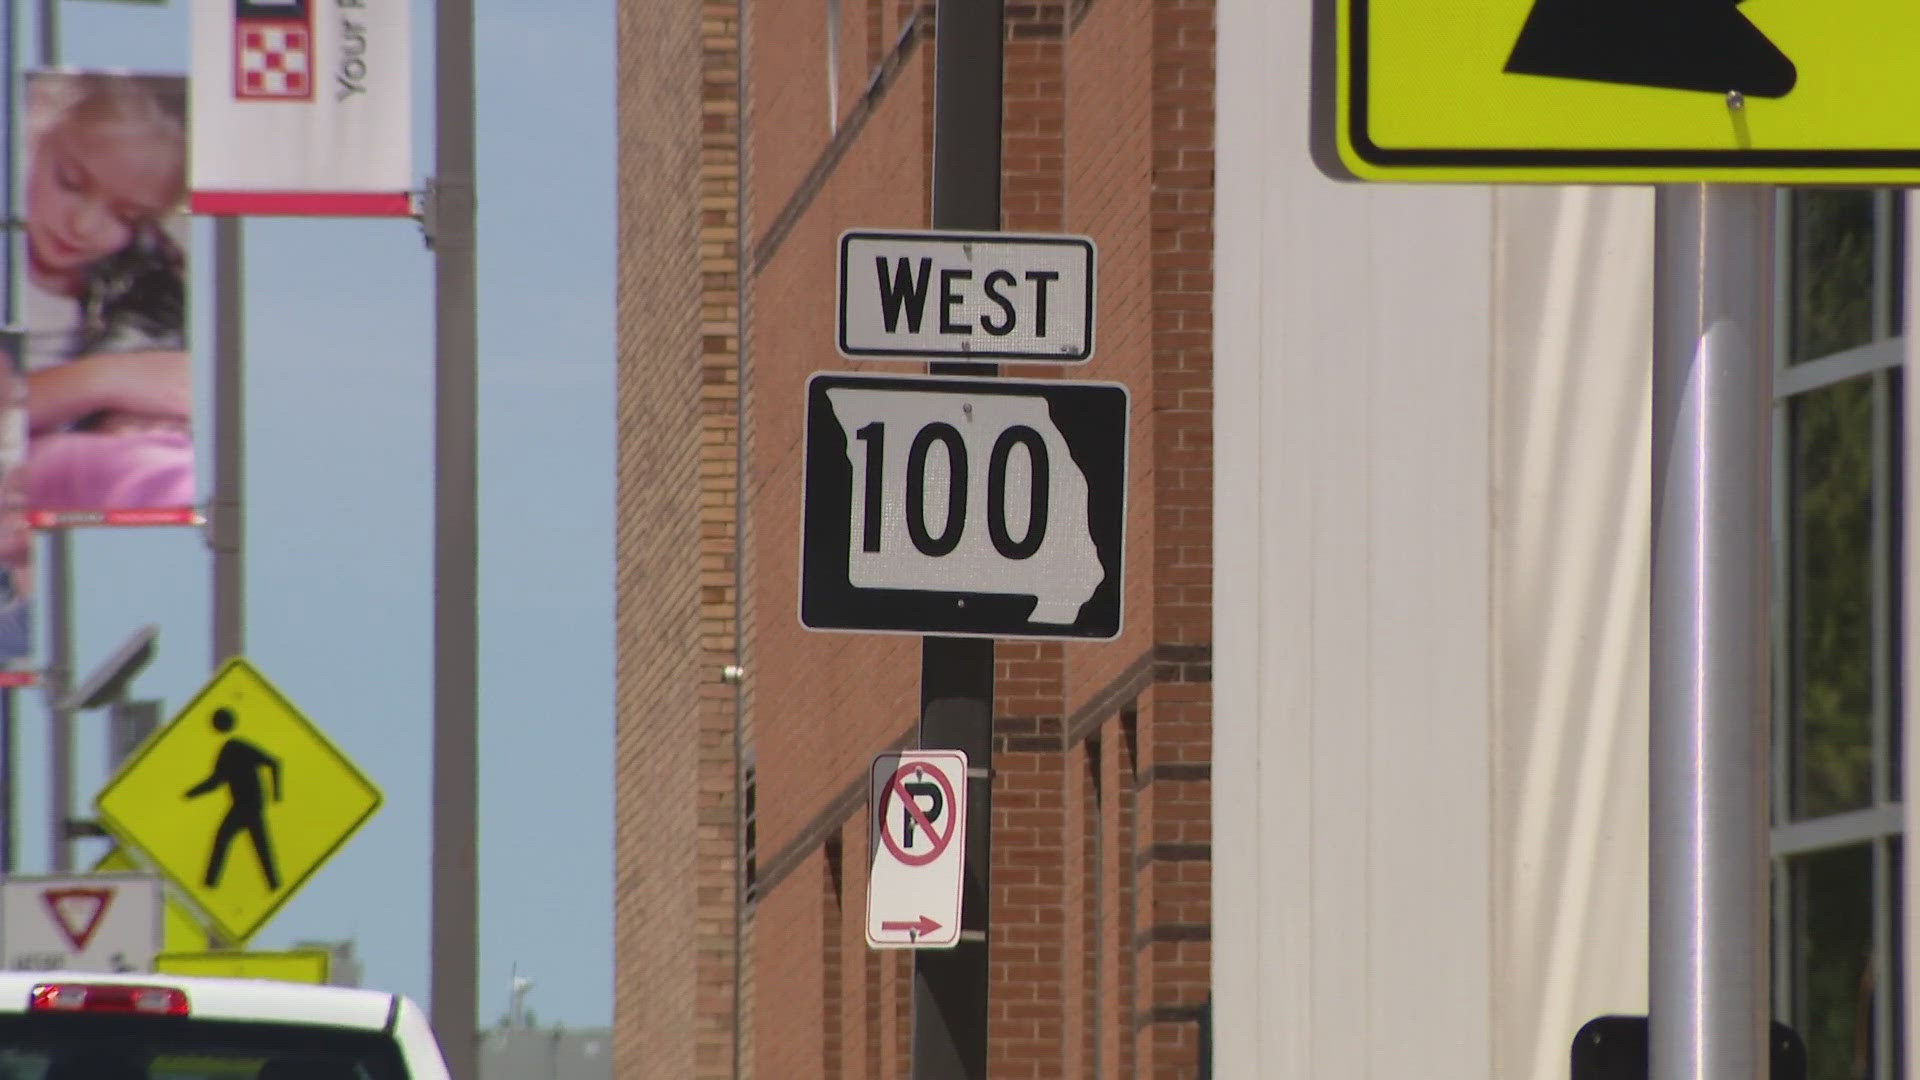 MoDOT shared its plans for the Route 100 Corridor last week. The project includes resurfacing the roadway and addressing major safety concerns in the area.